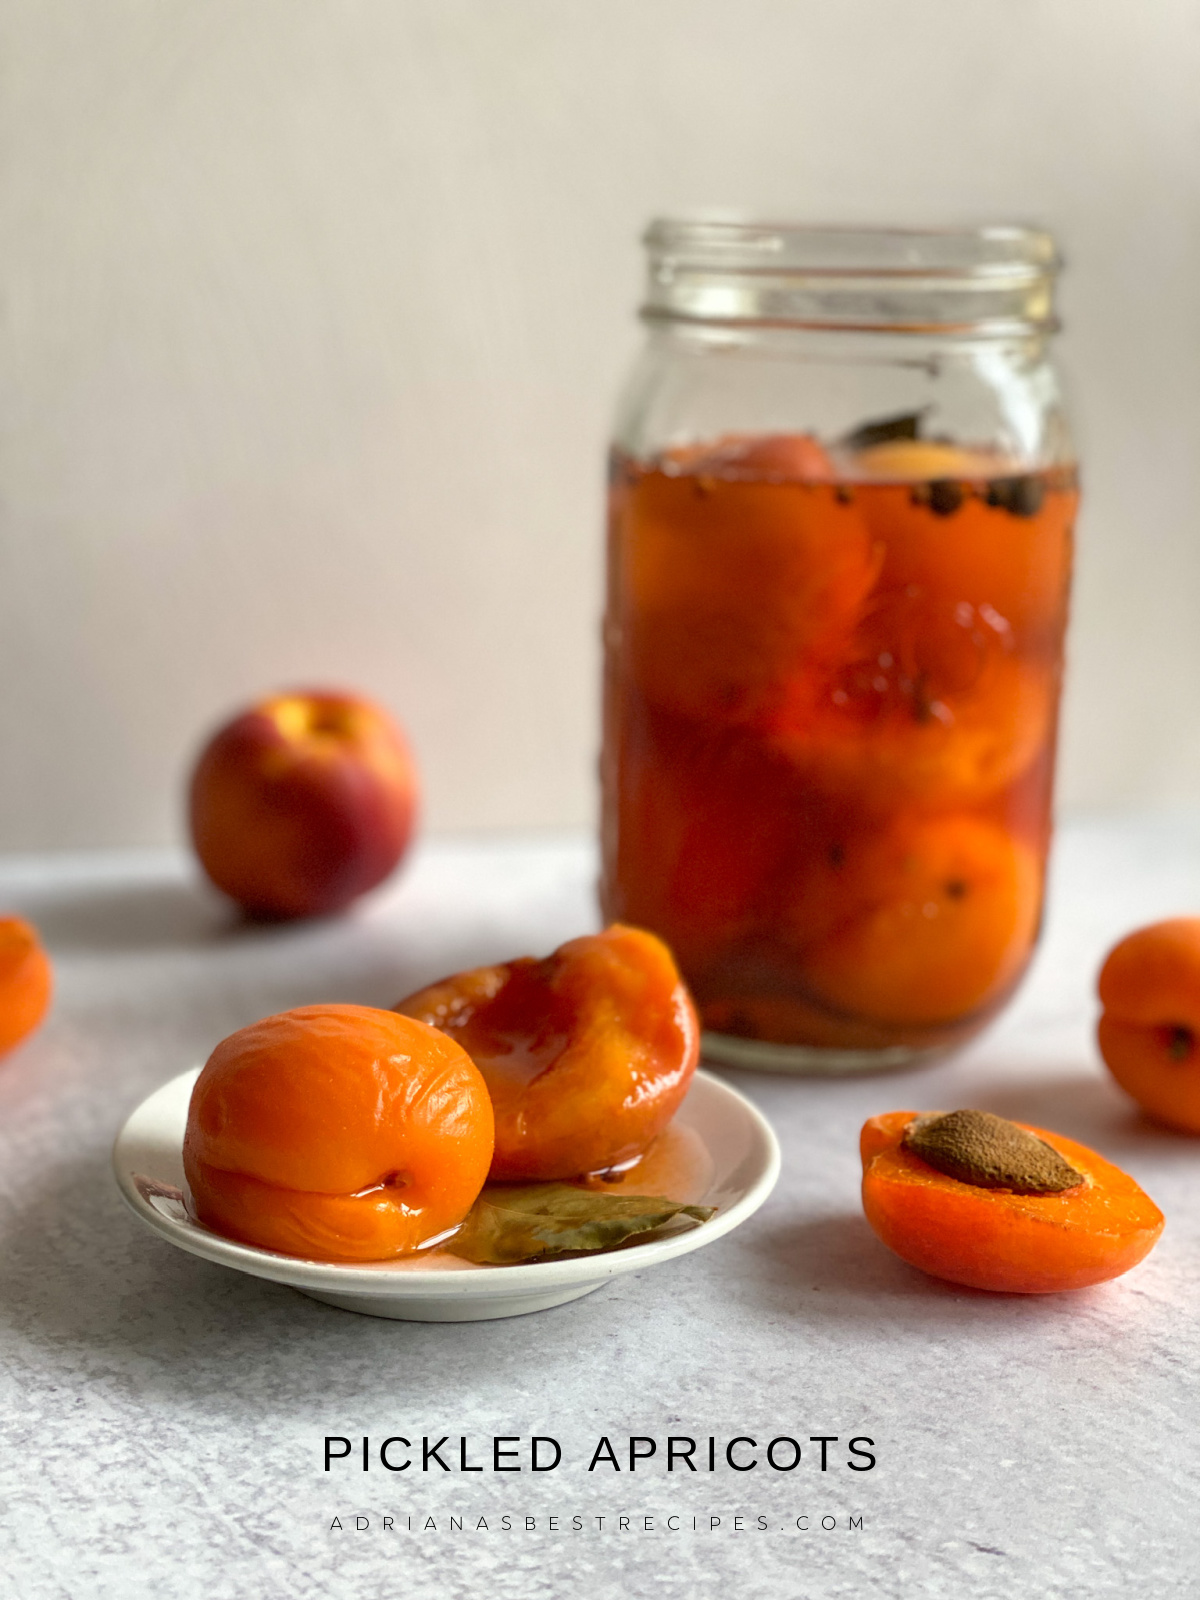 pickled apricots to substitute for umeboshi plums